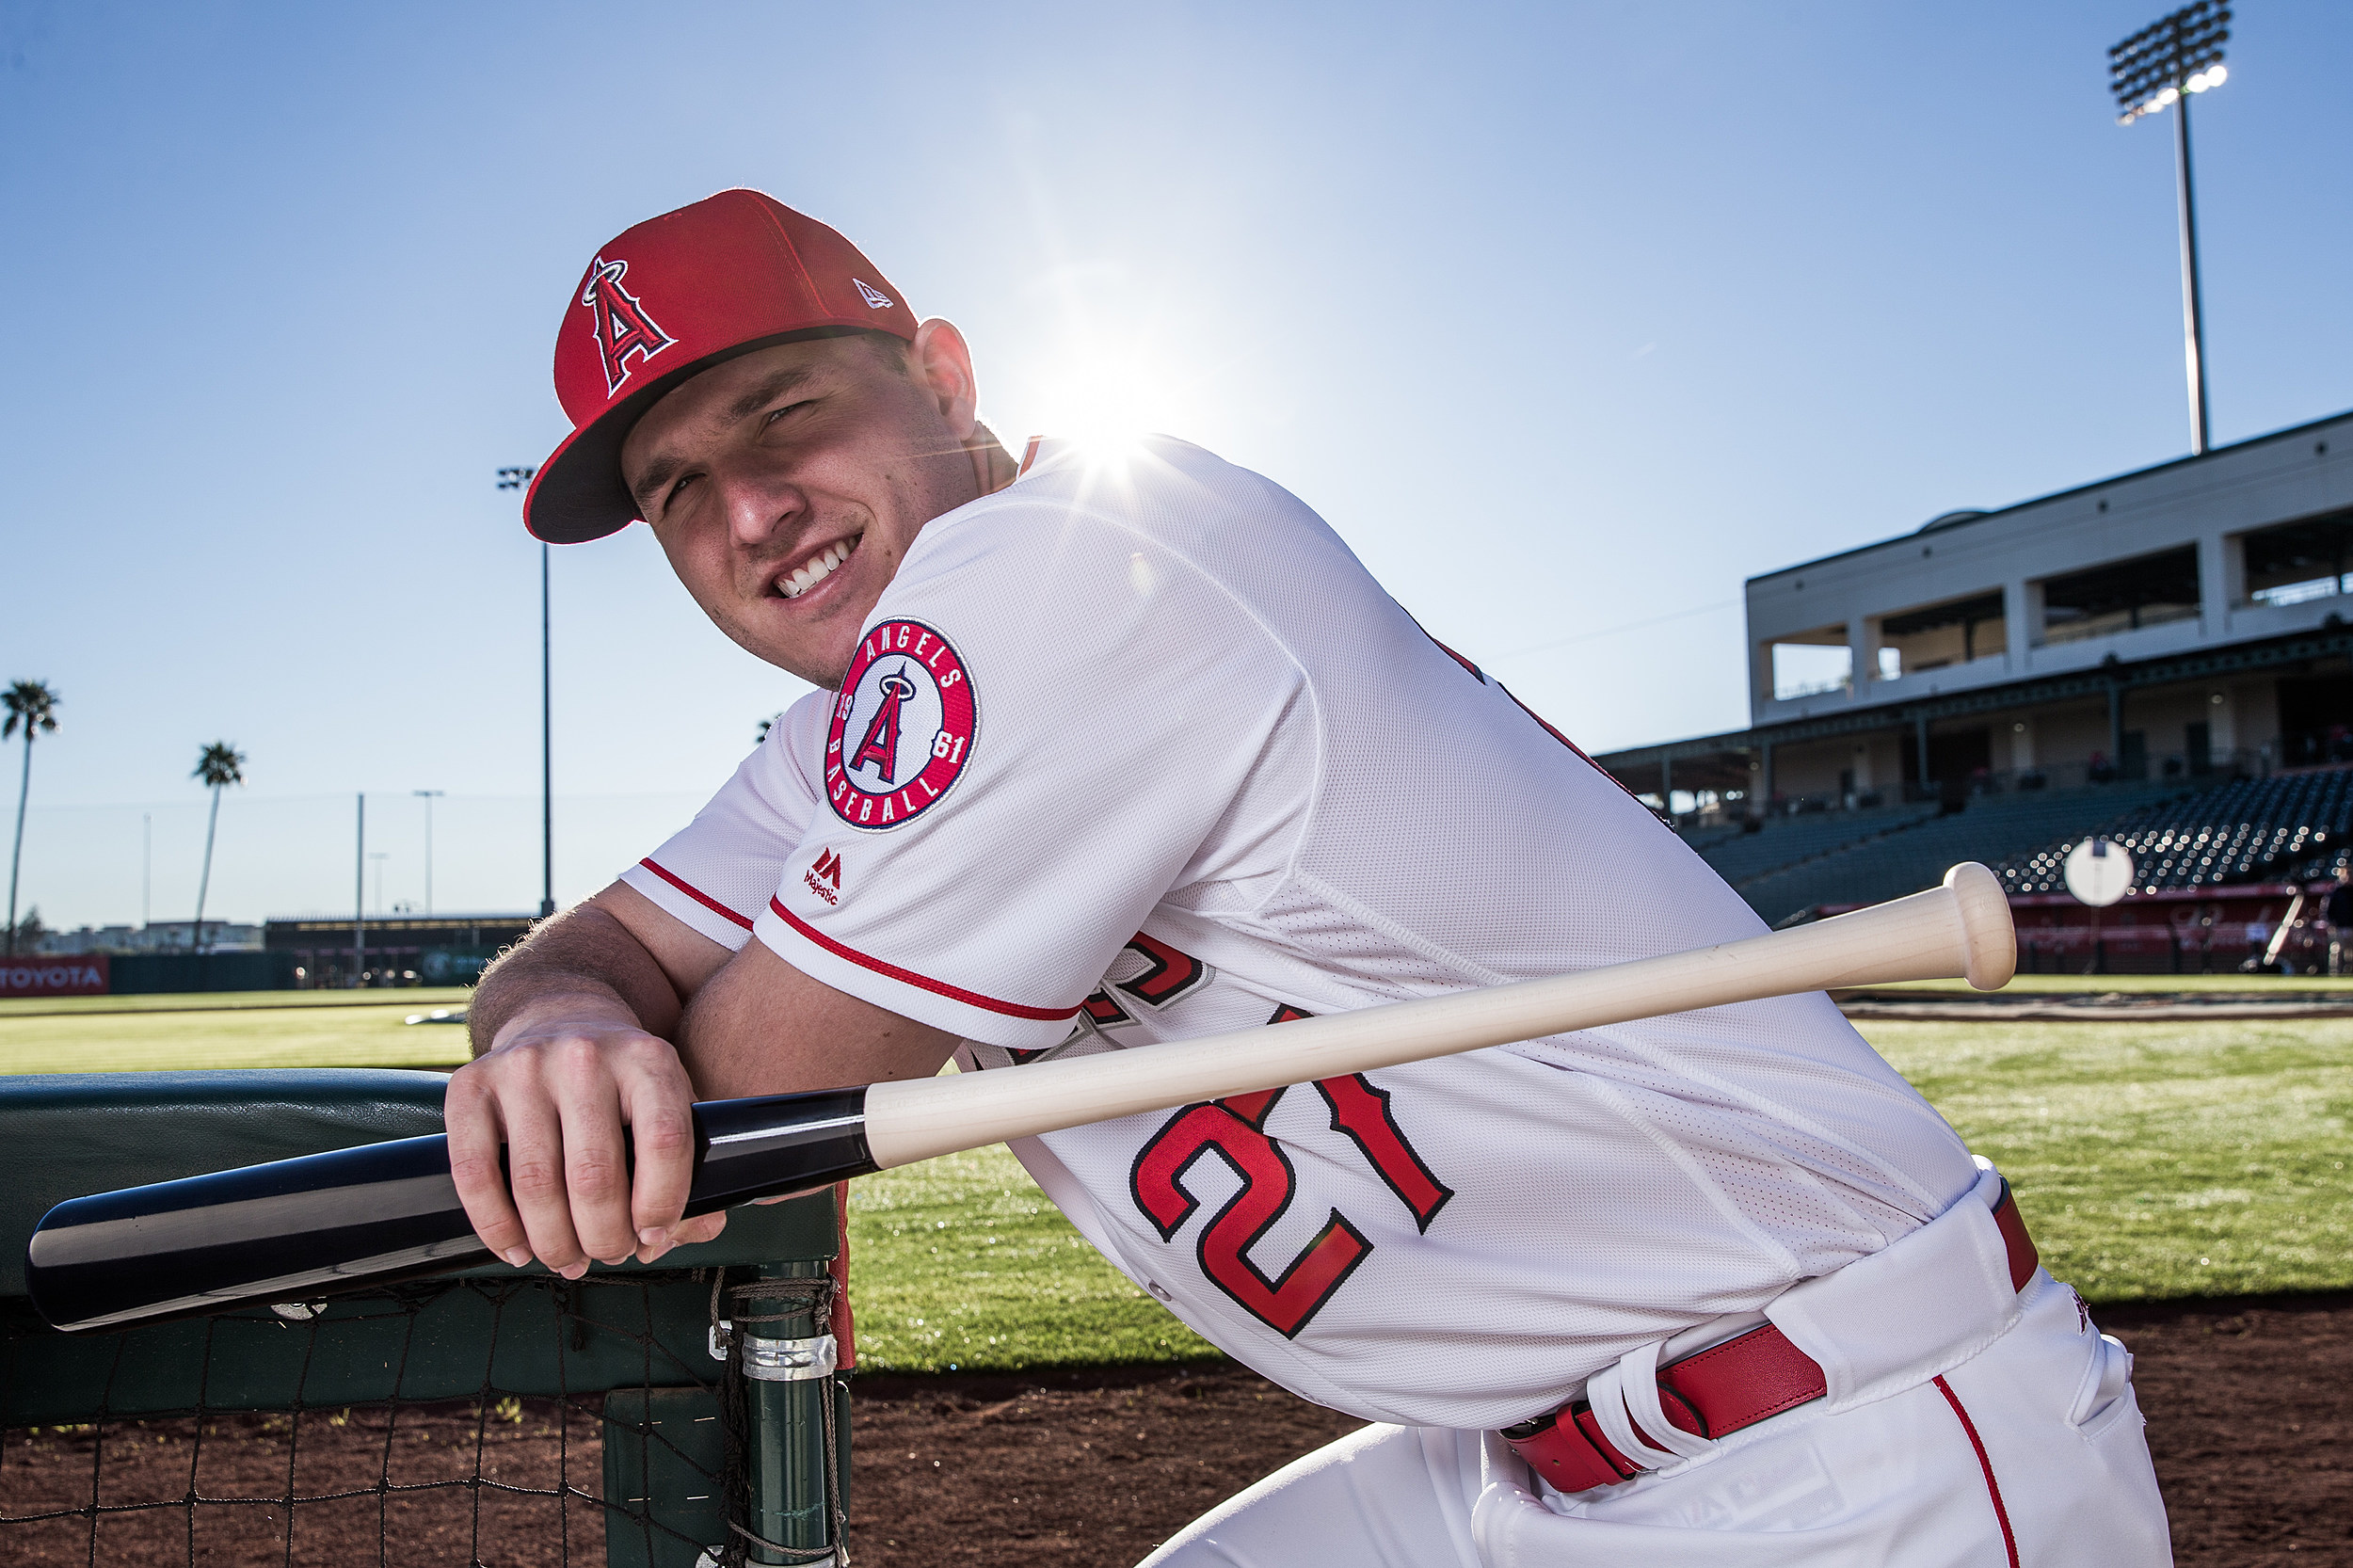 Mike Trout: 10-time MLB All Star diagnosed with rare back